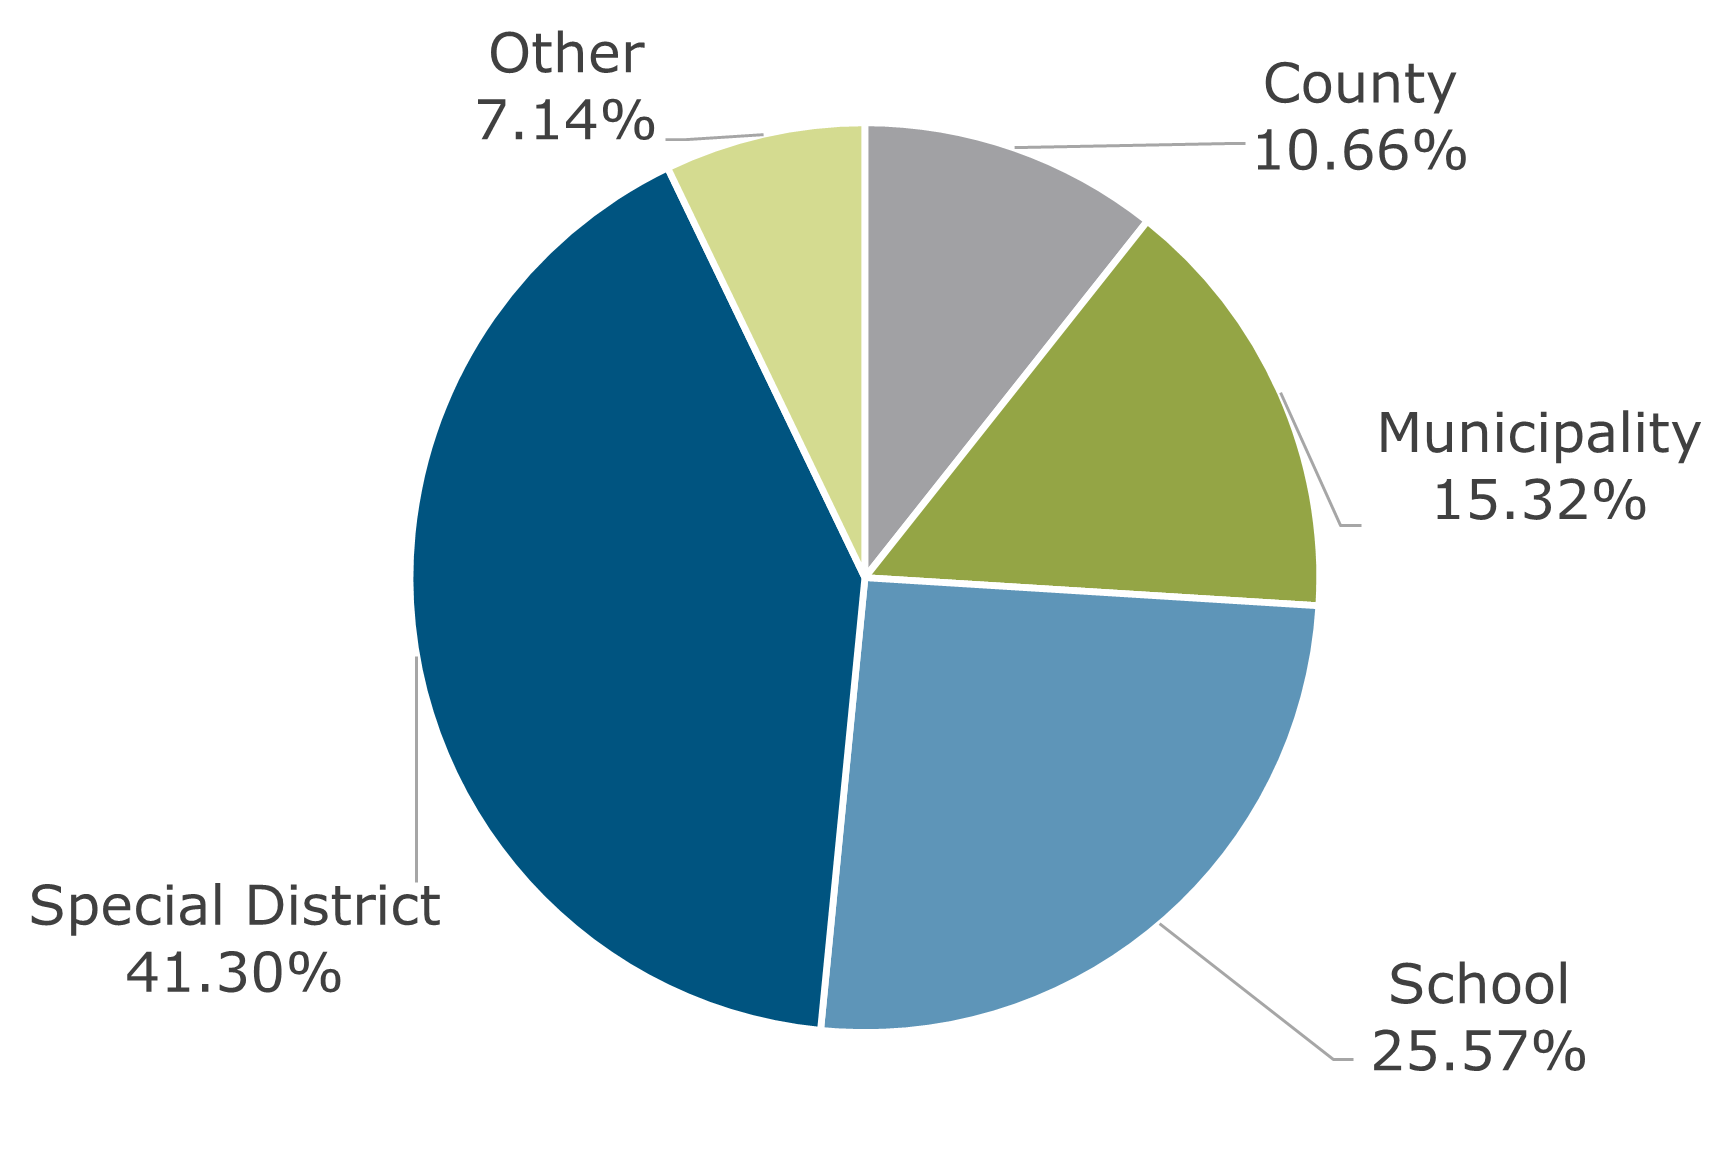 04.23 - Texas CLASS Participant Breakdown by Type